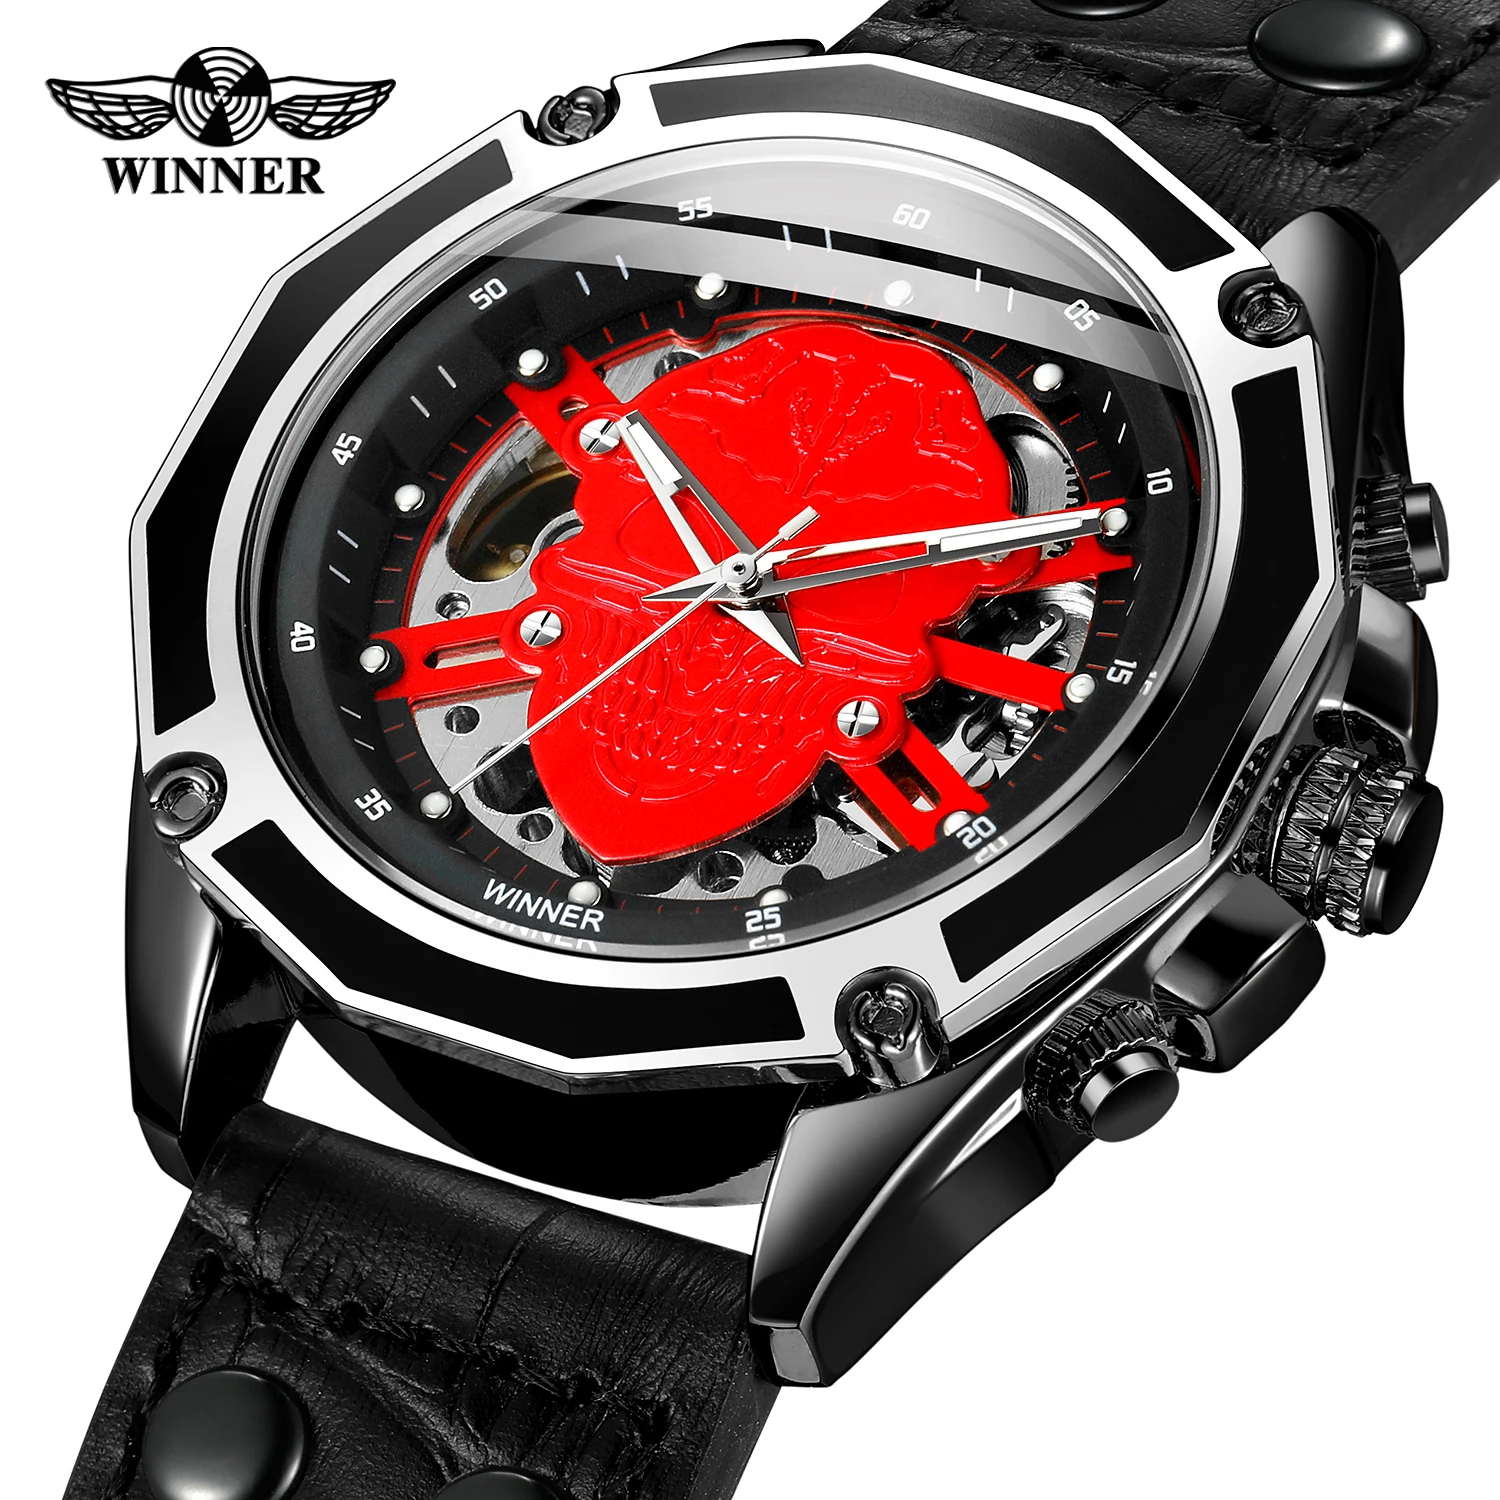 

Fashion Winner Dial Skull Skeleton Wristwatch For Men Self-winding Movement High-end Luxury Top Brand Leather Band